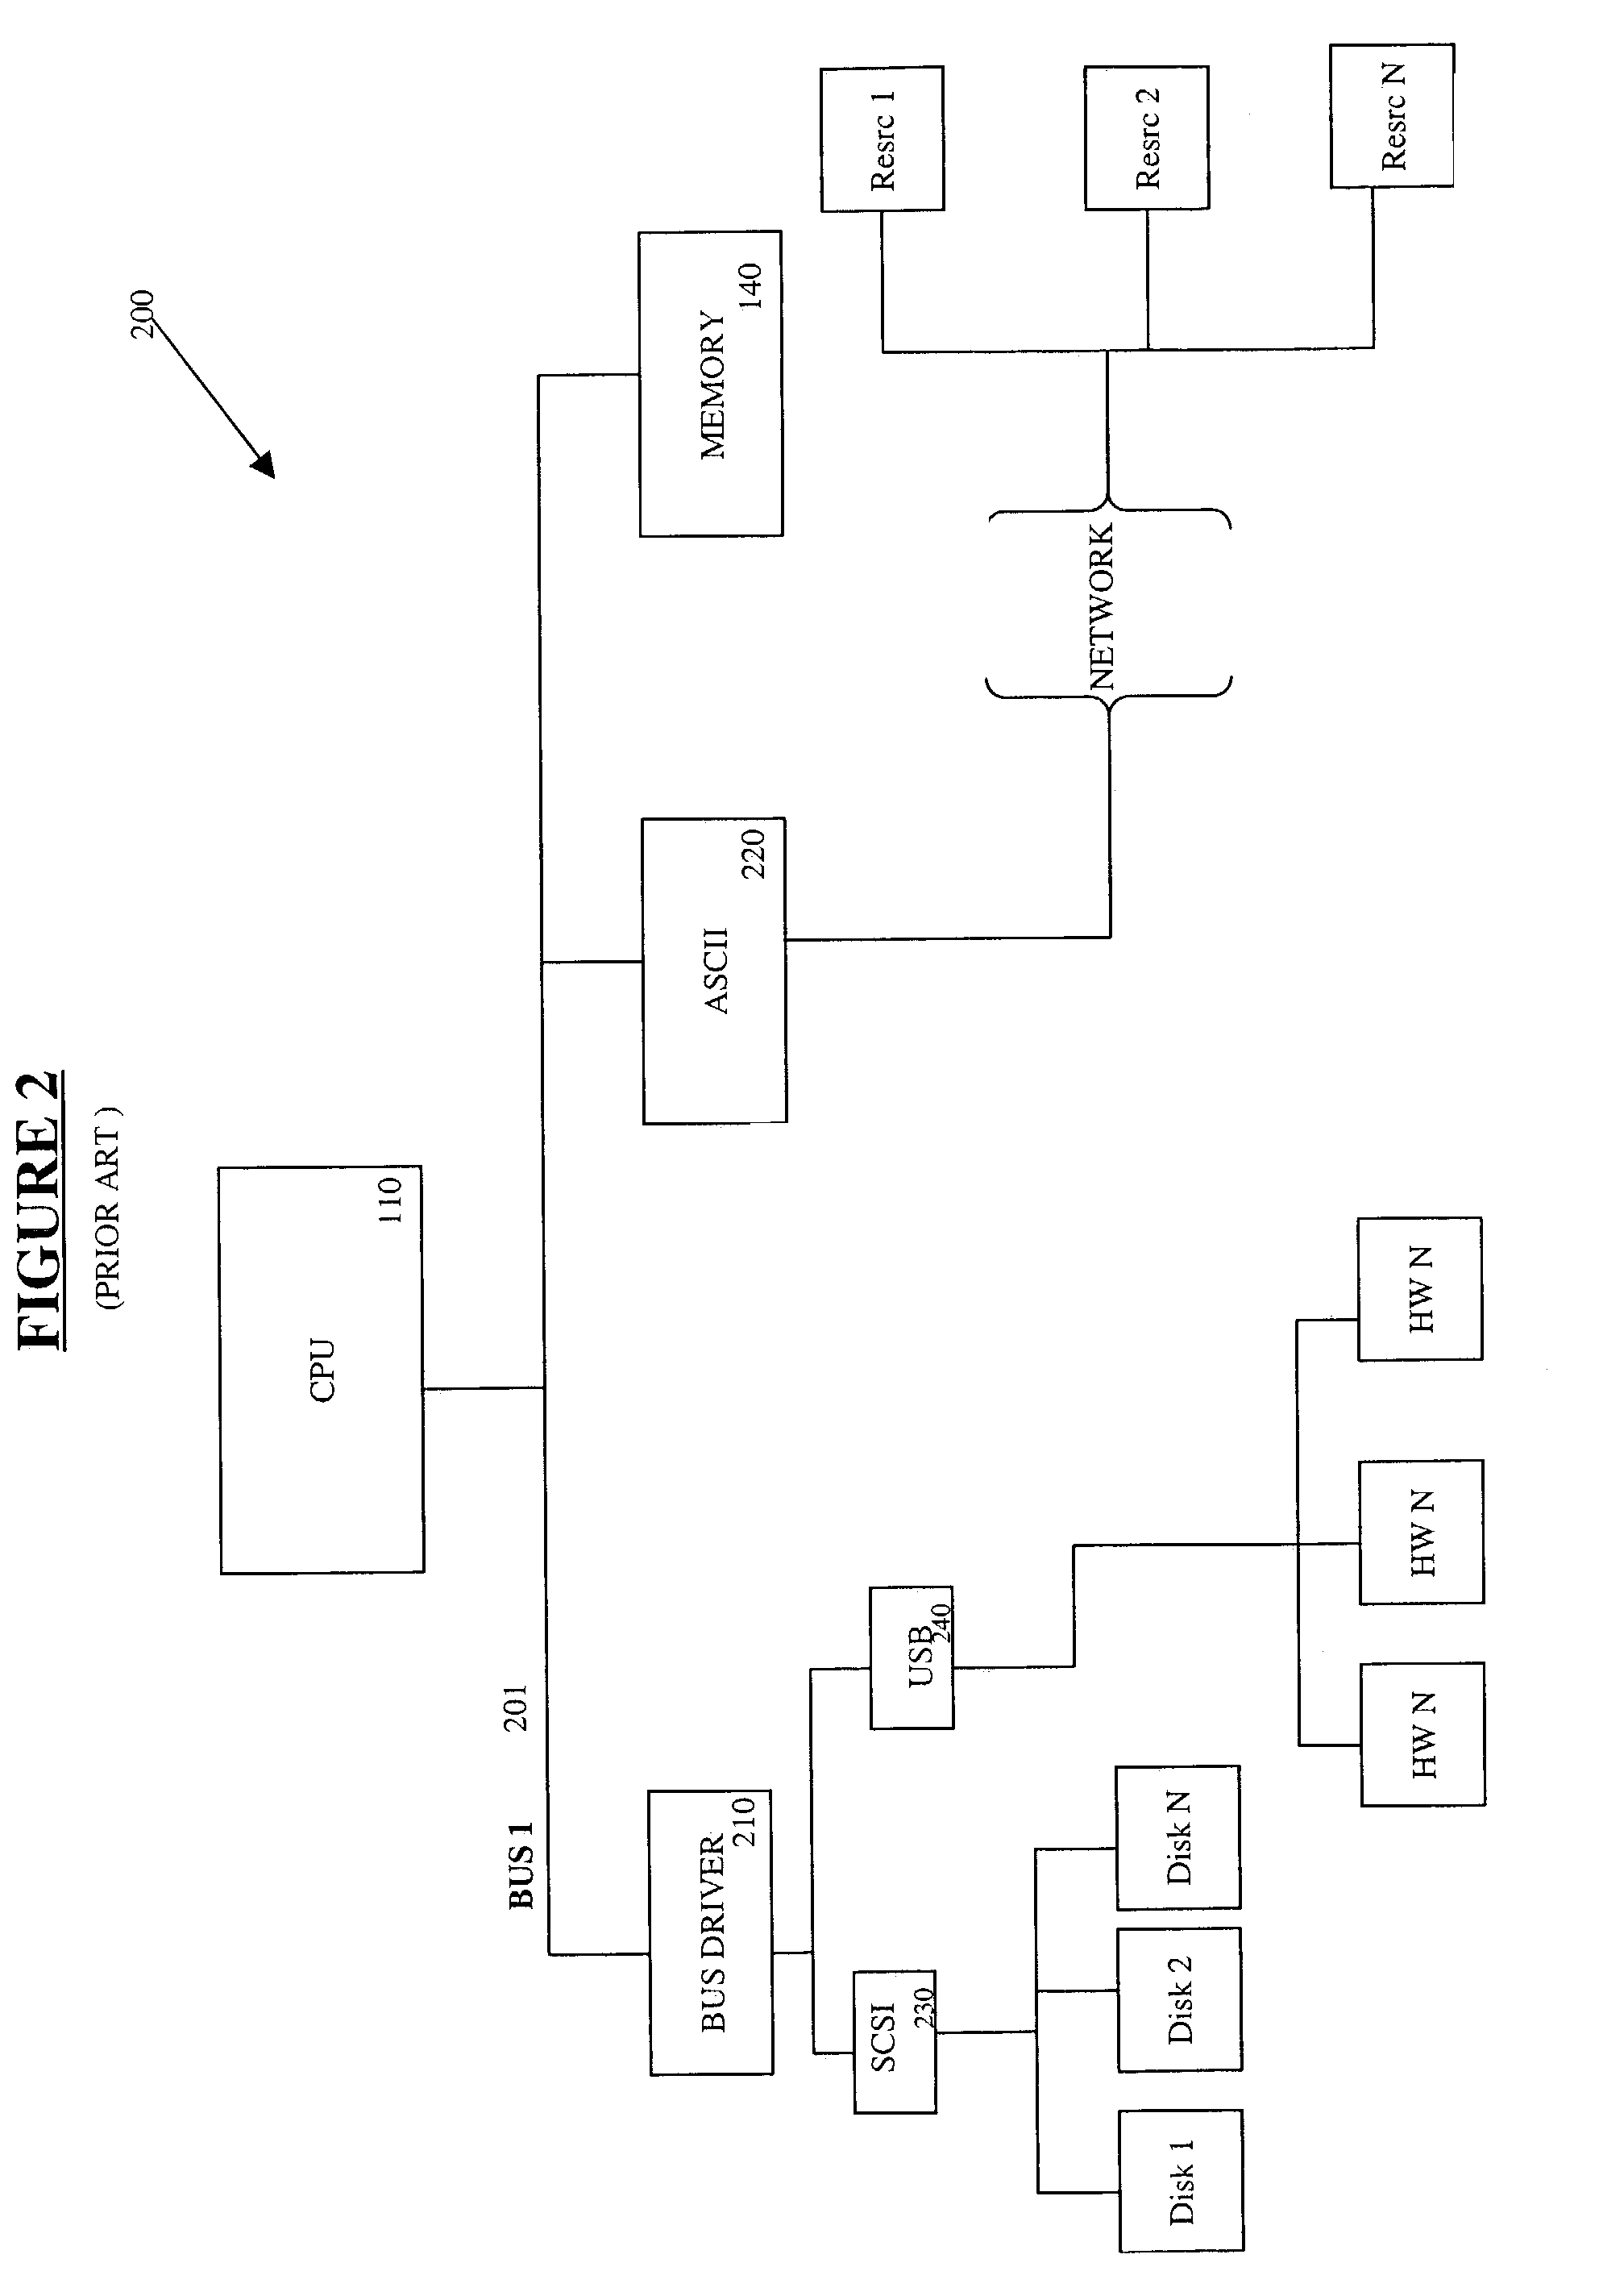 Bus specific device enumeration system and method